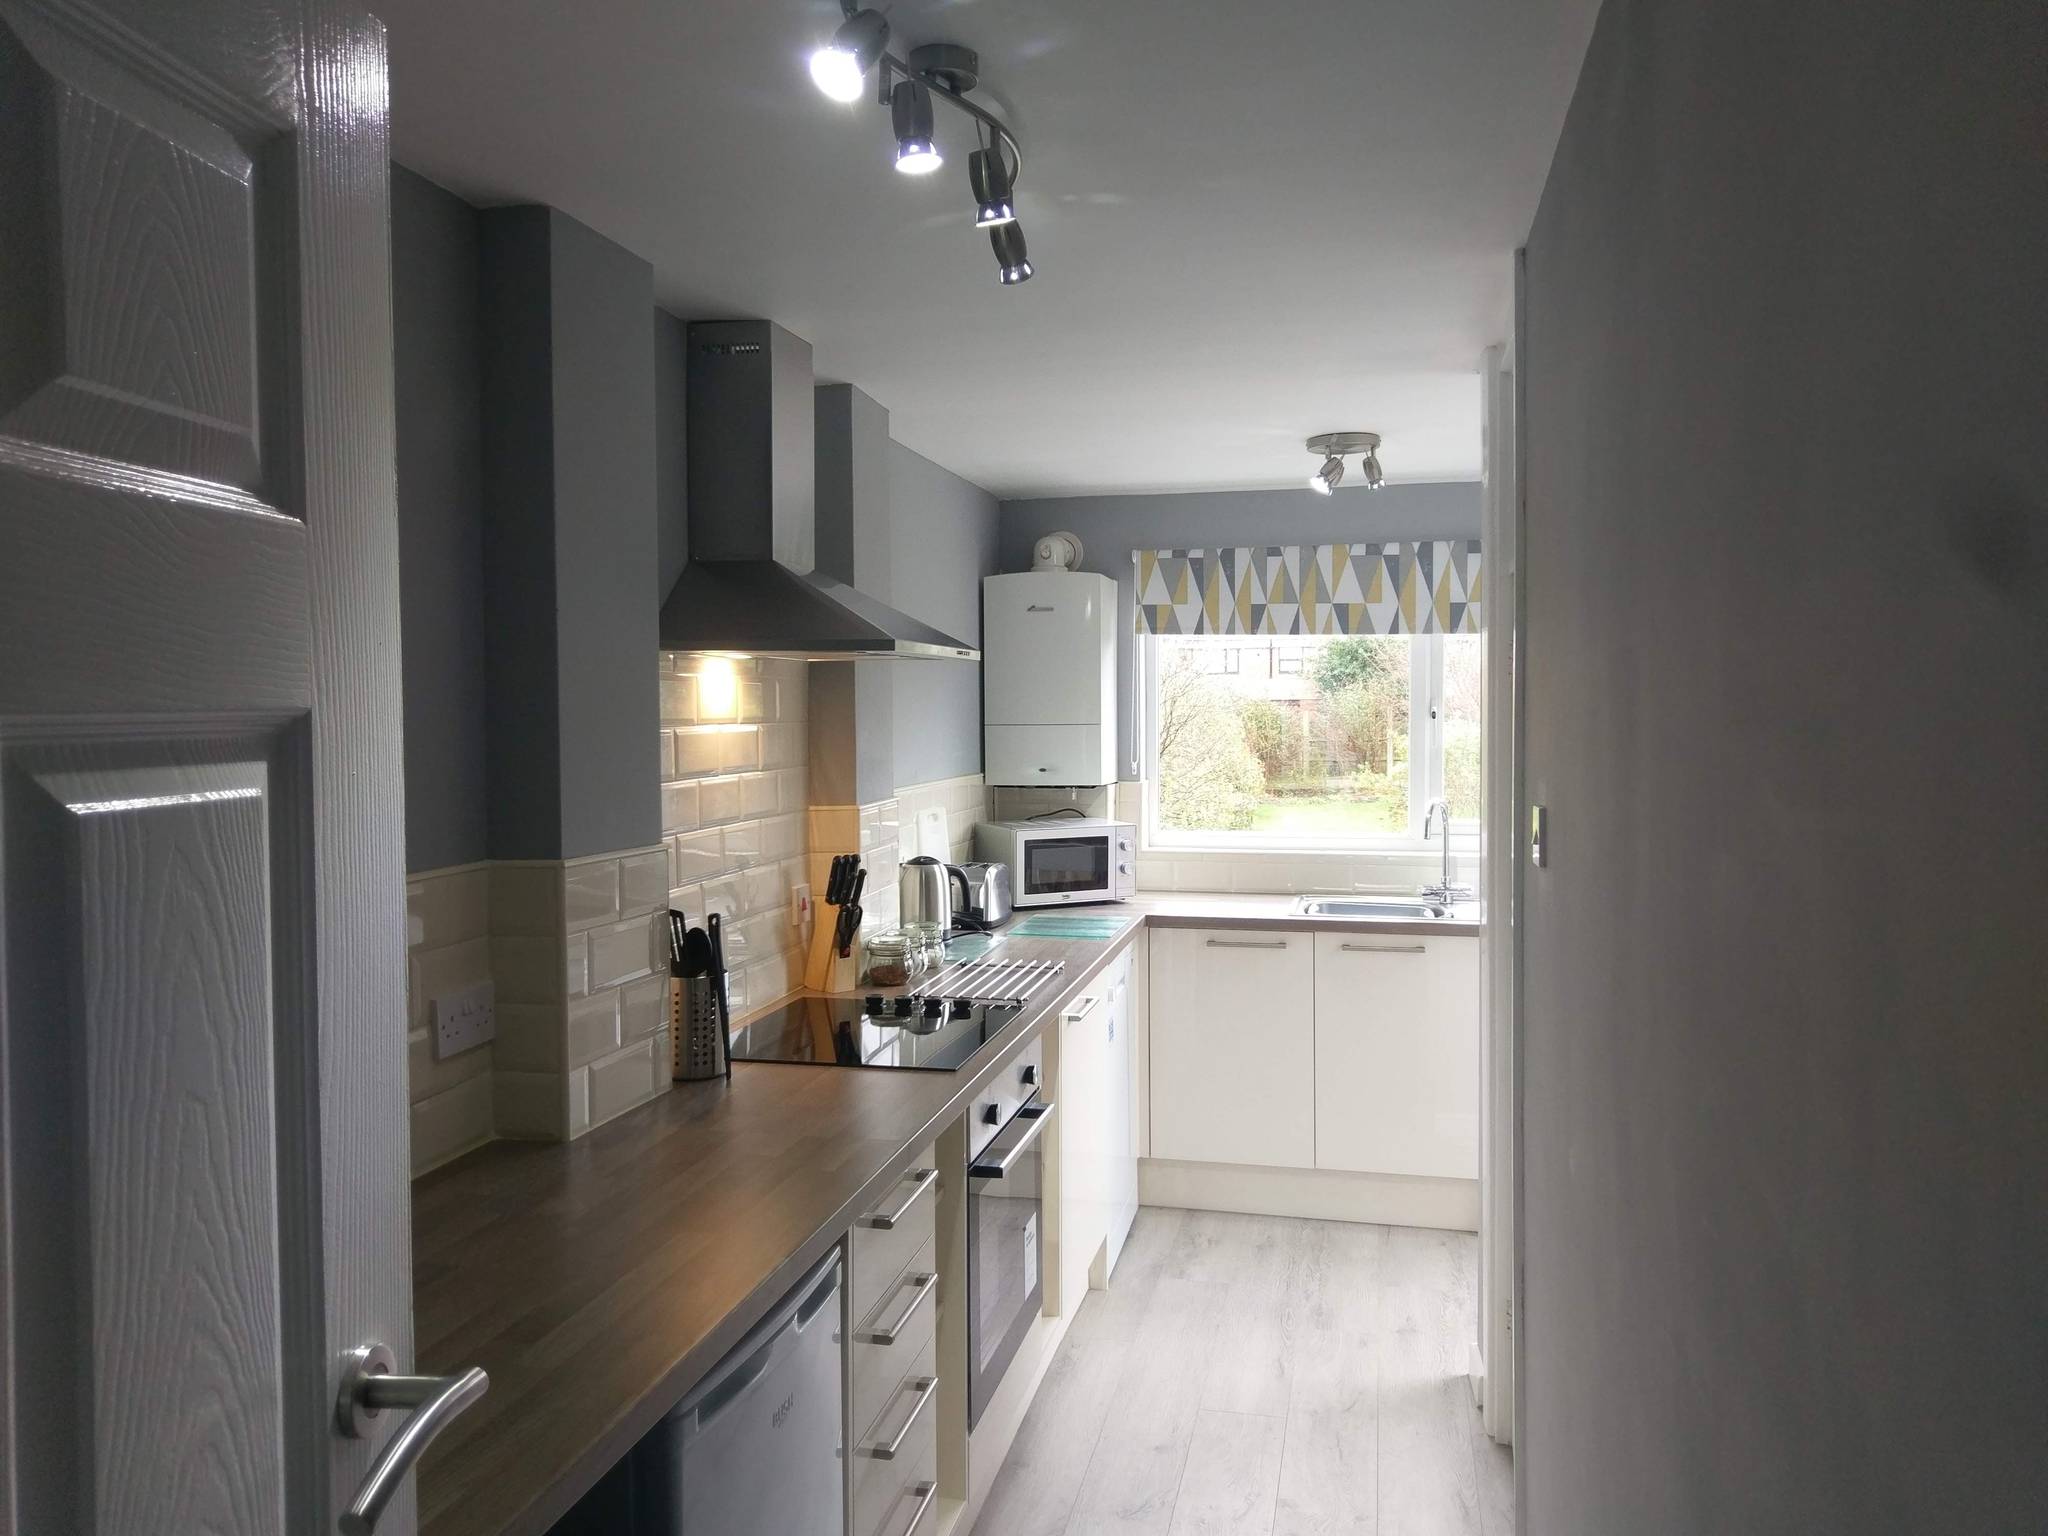 Coventry Accommodation Ltd - Wyken House - 3 Bed House Coventry - Sleeps 5